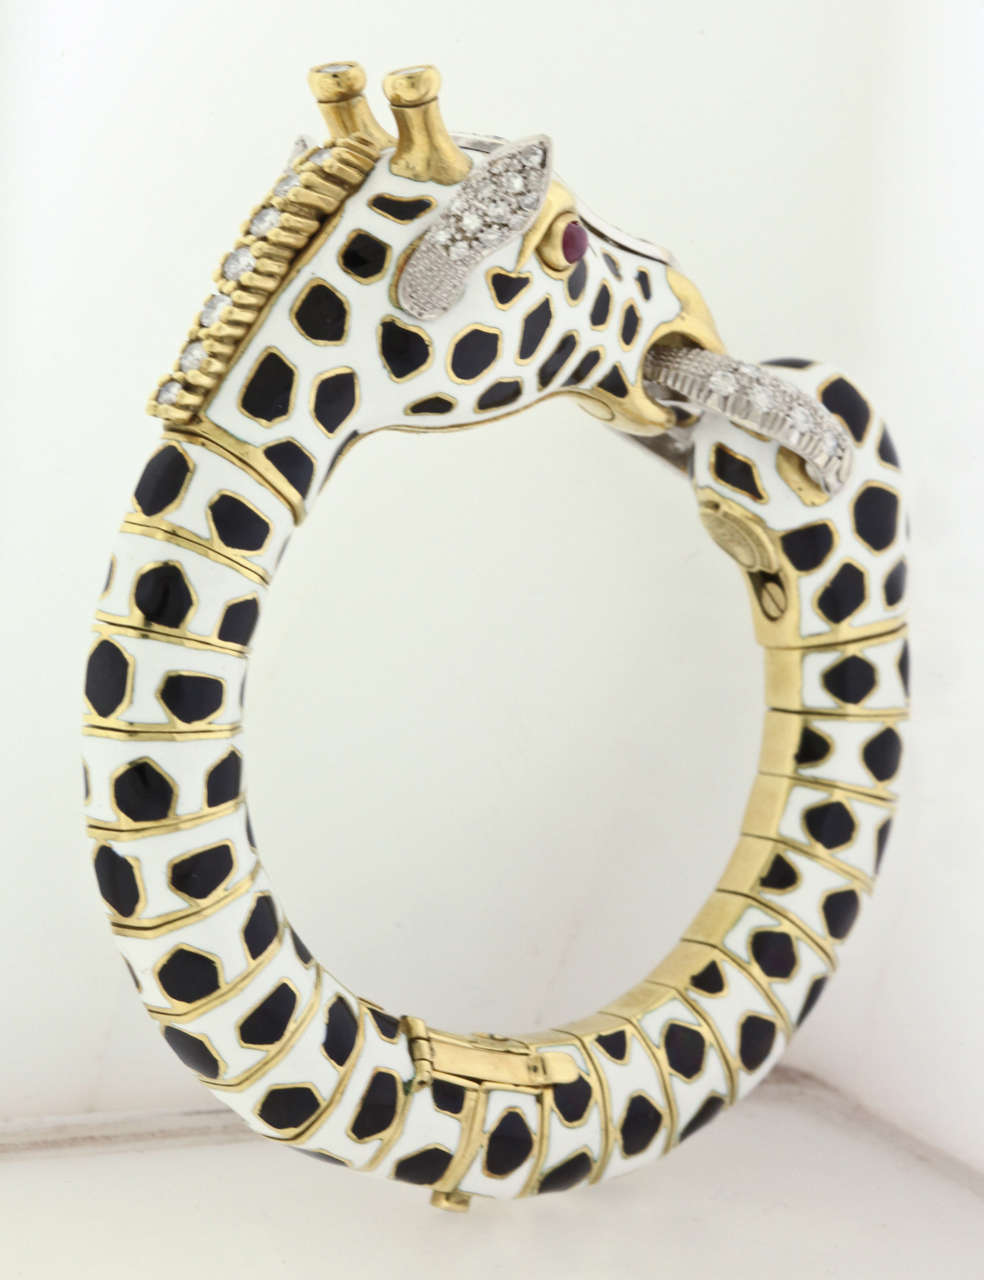 Magnificent enamel, gold and diamond Giraffe hinged bracelet from Frascarolo Italy, circa 1971, is in mint condition, the ultimate expression of the 70's era, with its bold black and white enamel, ruby eyes, diamond studded heads and clasp, and